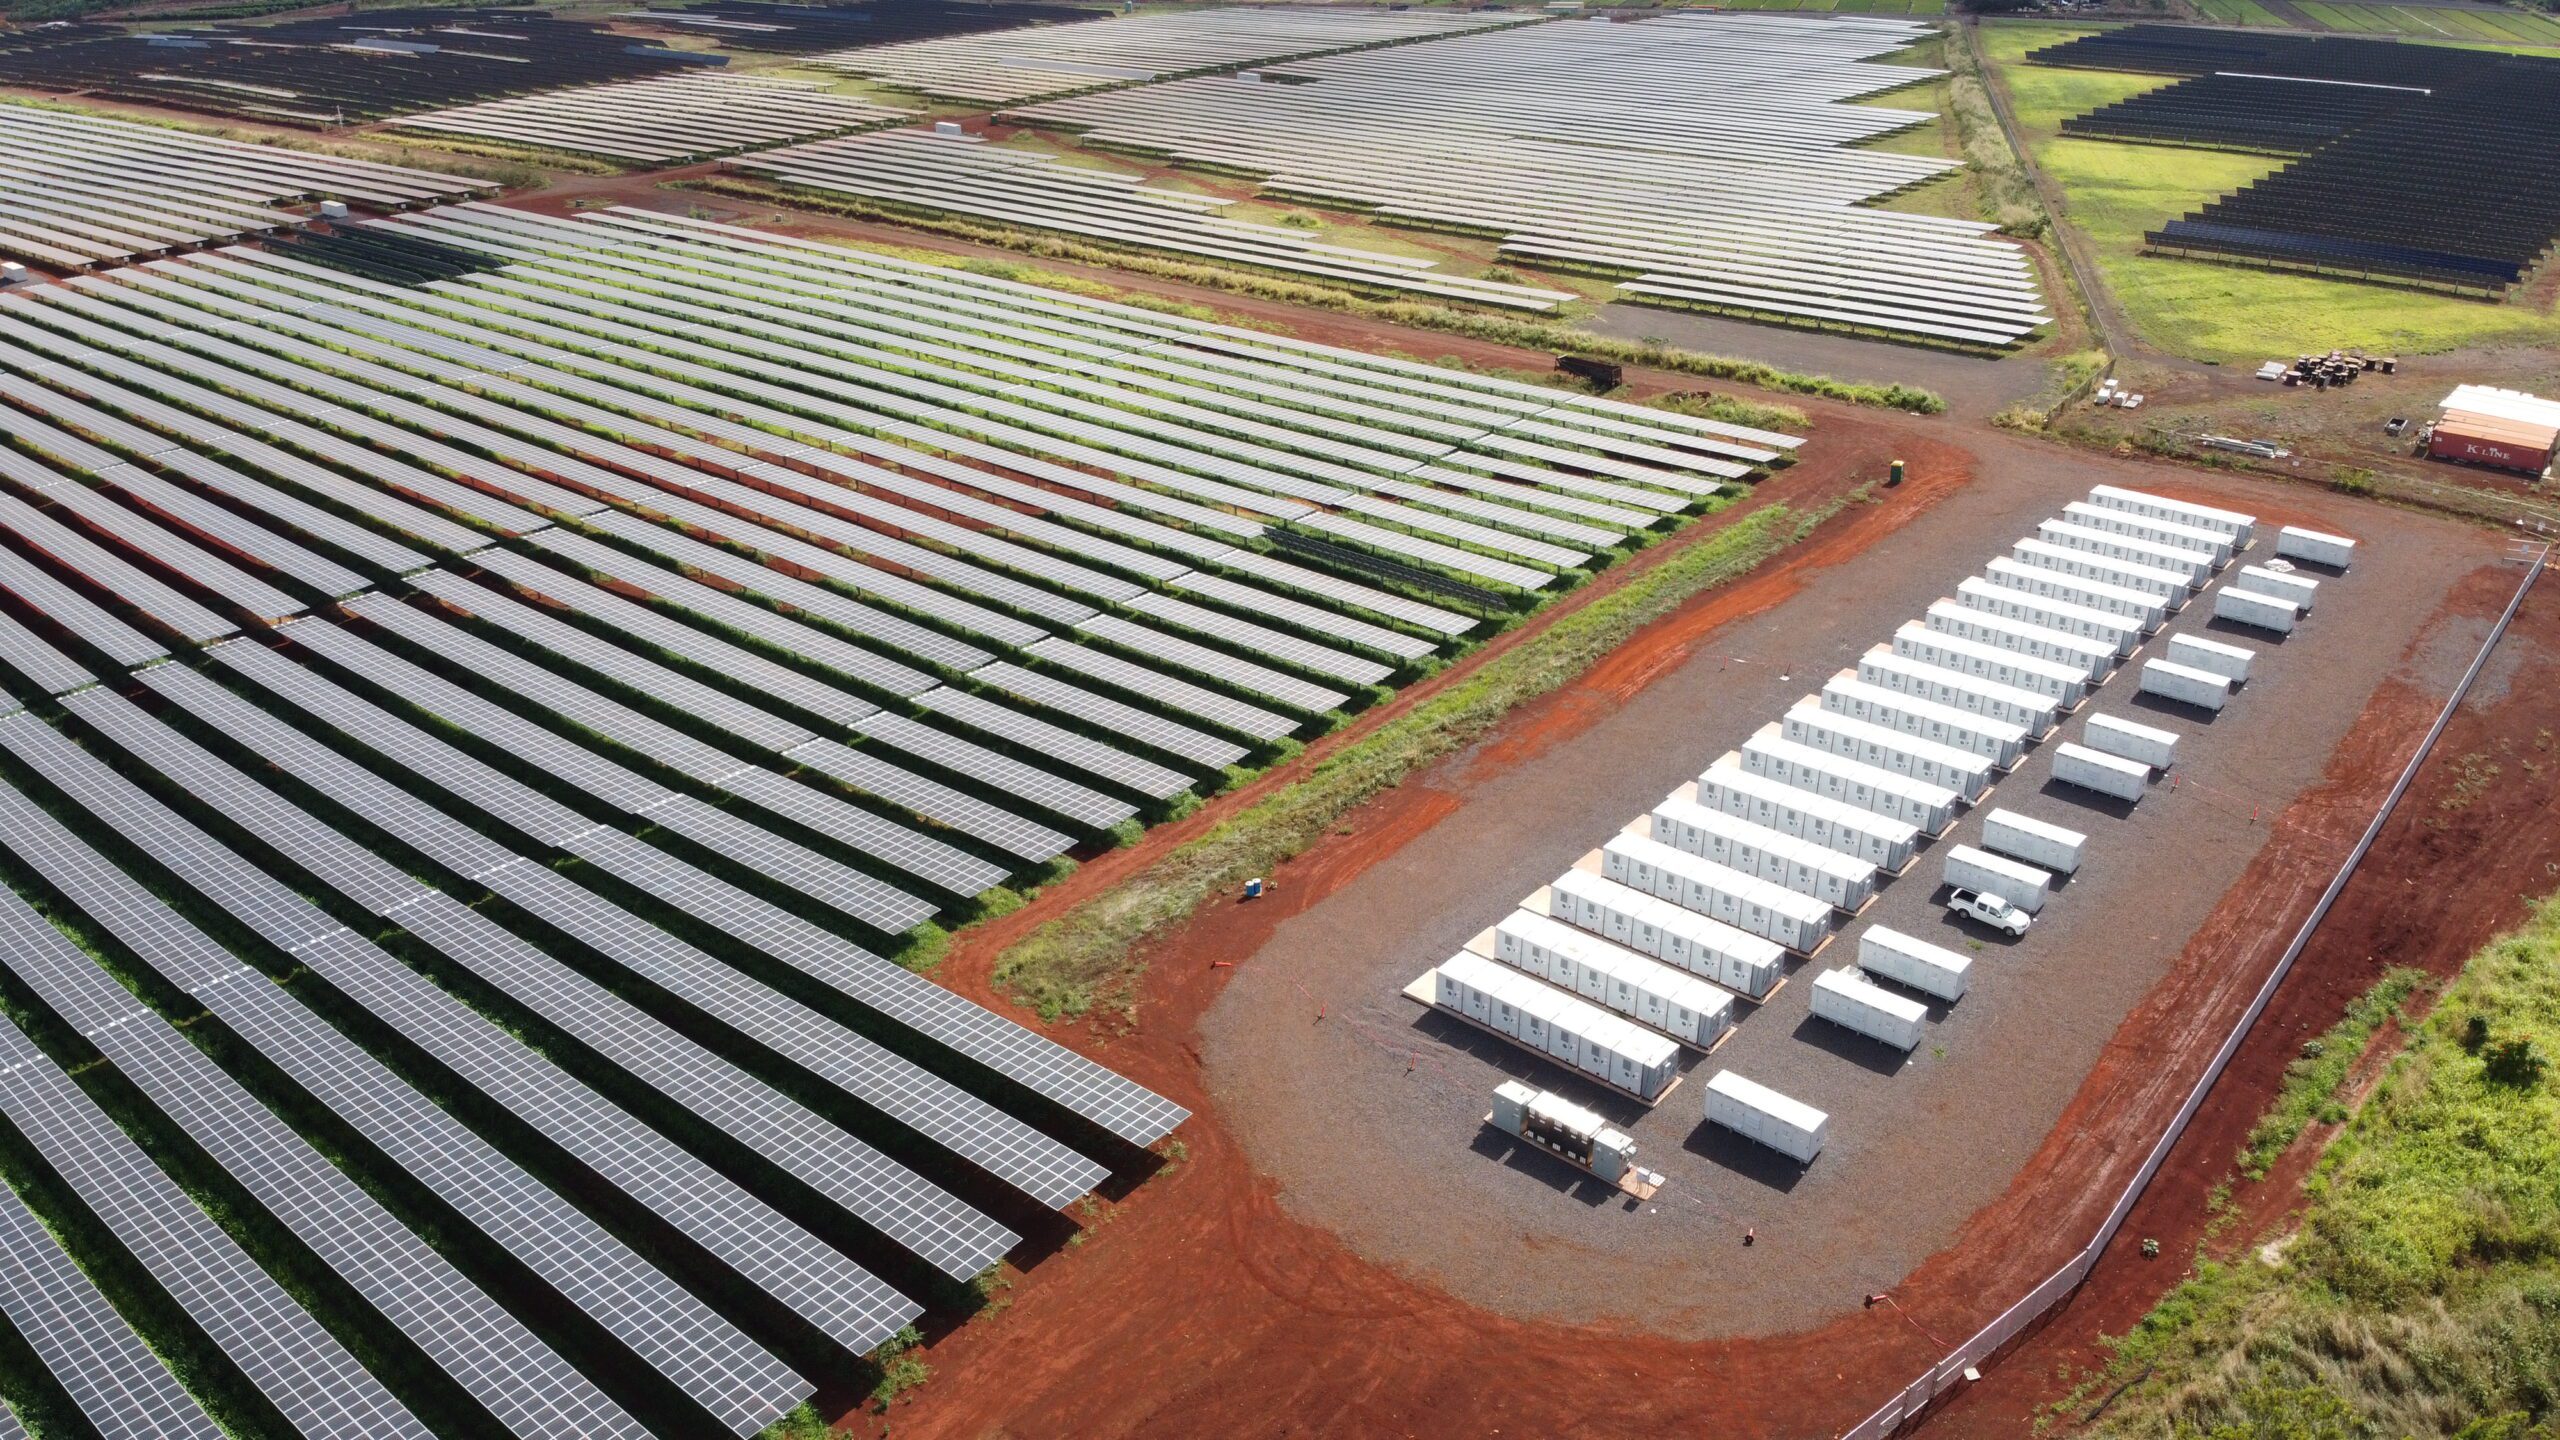 Clearway, Wartsila Partner on Five Large Solar-Plus-Storage Projects